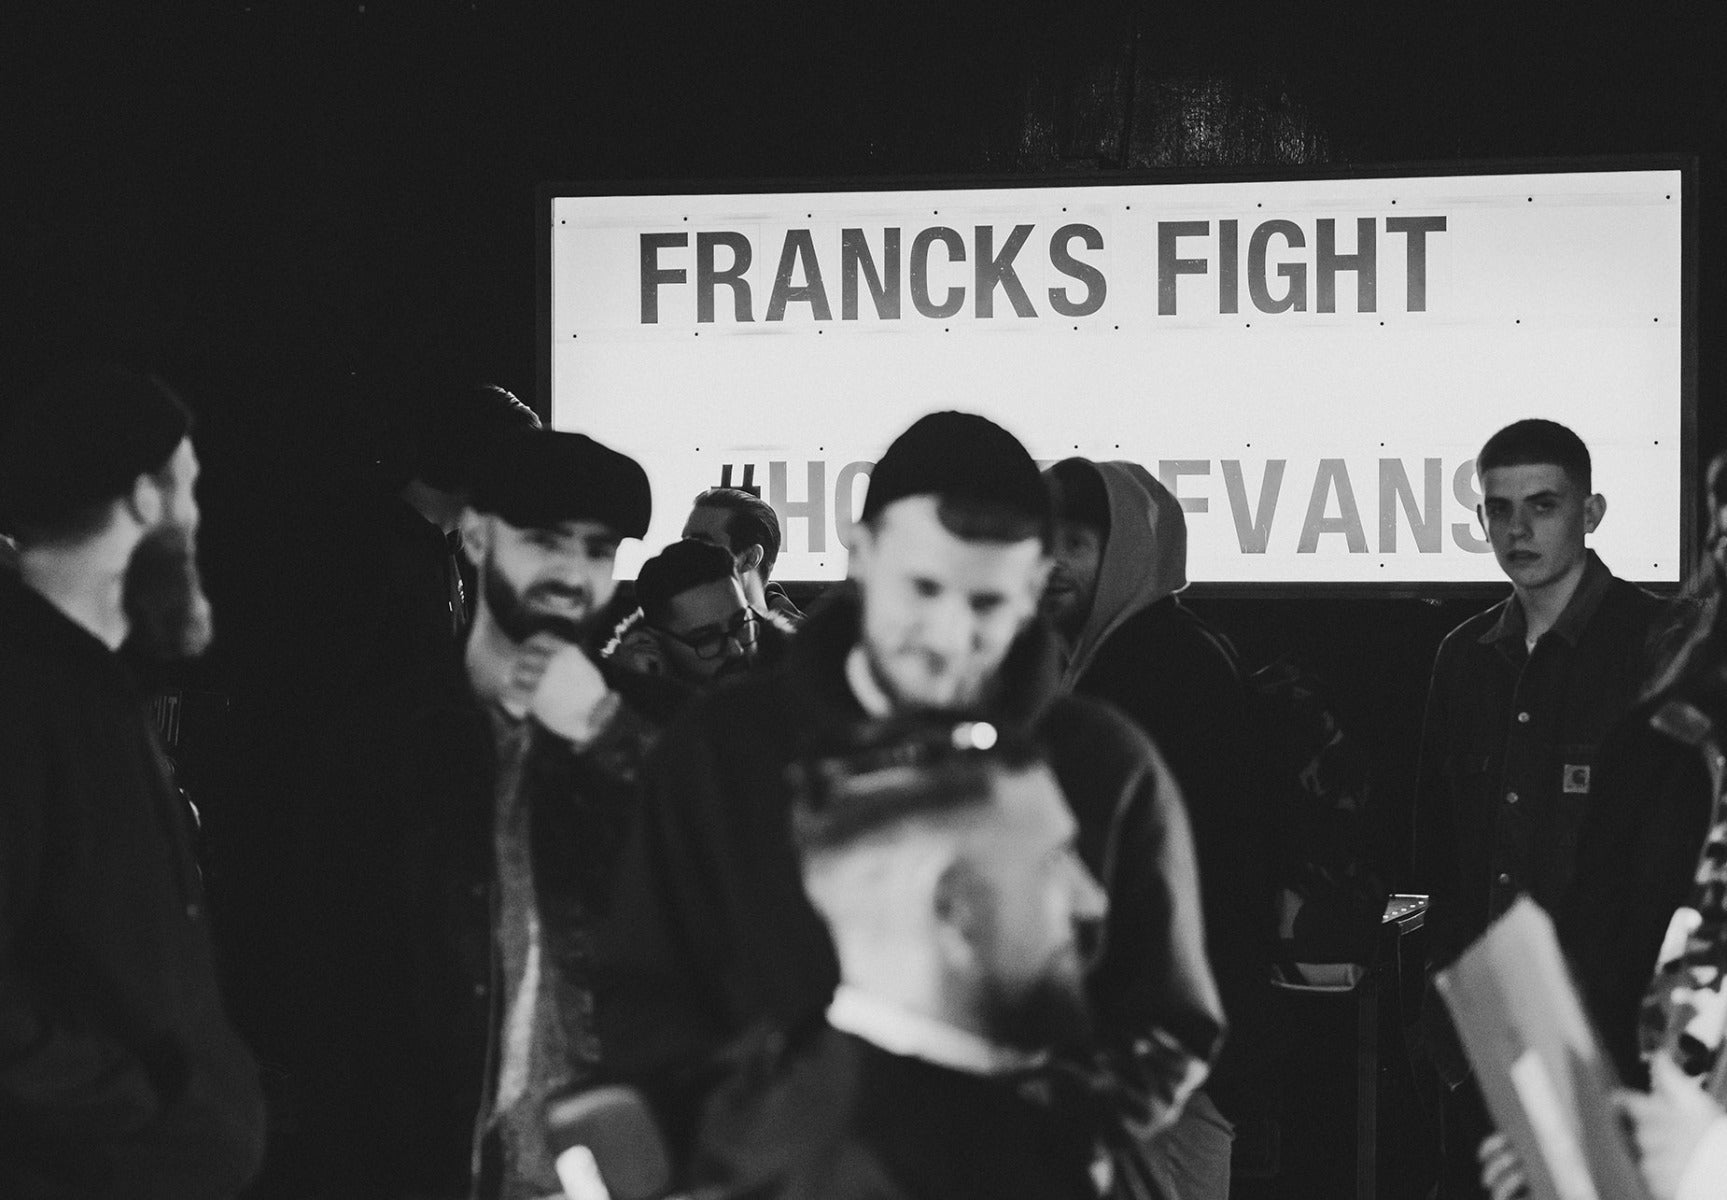 Group of people with Francks Fight sign in the background